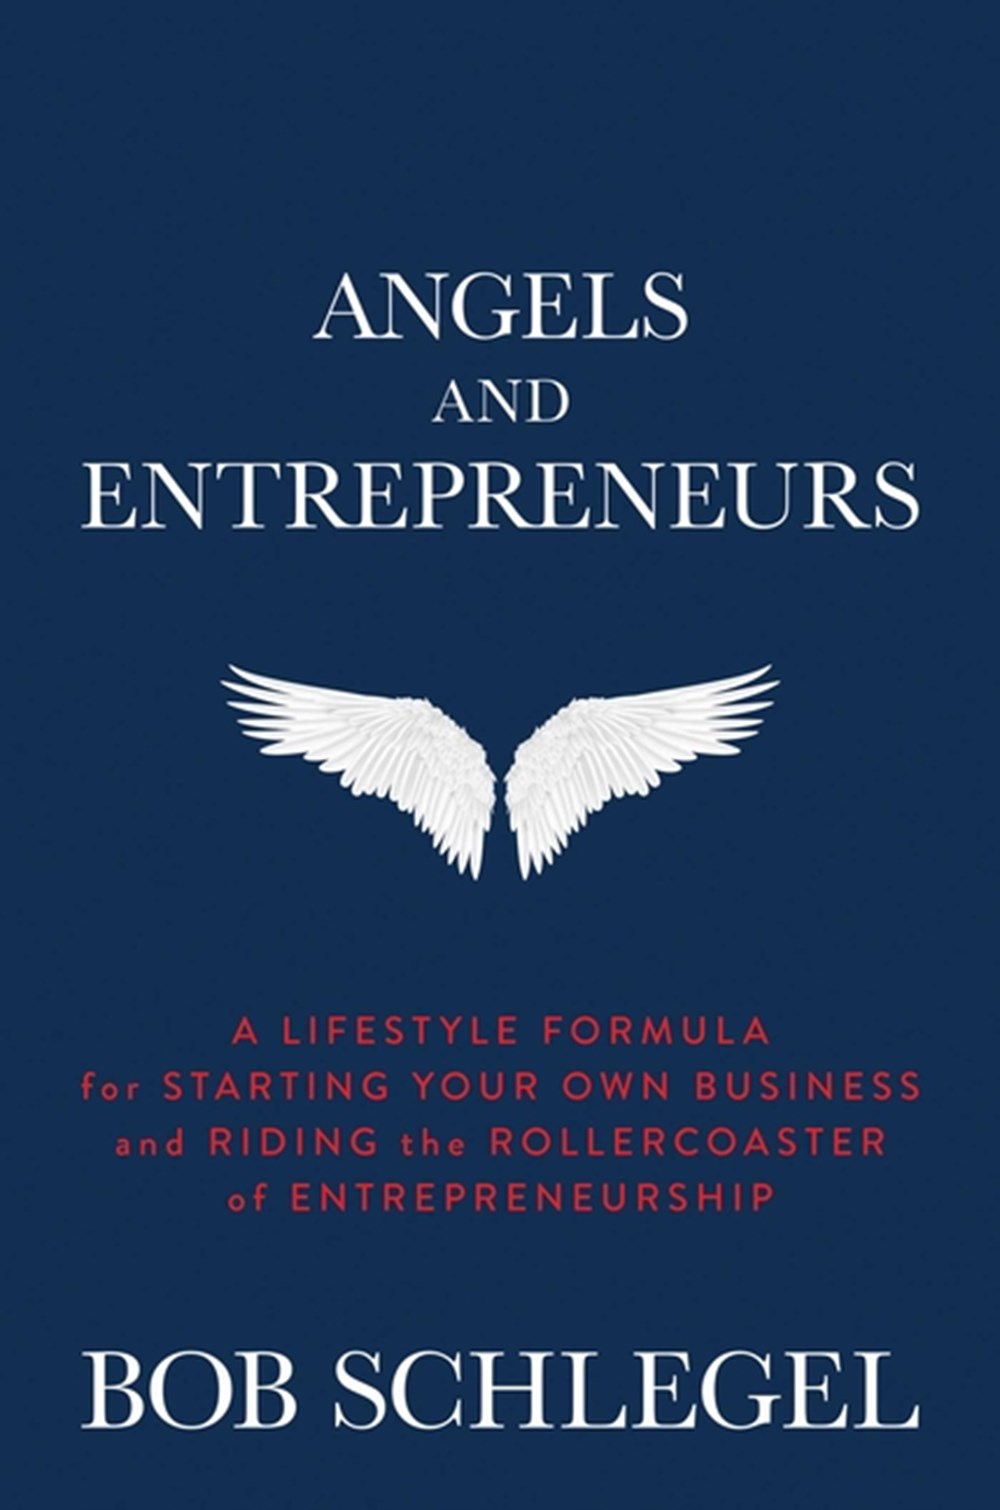 Angels and Entrepreneurs A Lifestyle Formula for Starting Your Own Business and Riding the Rollercoa